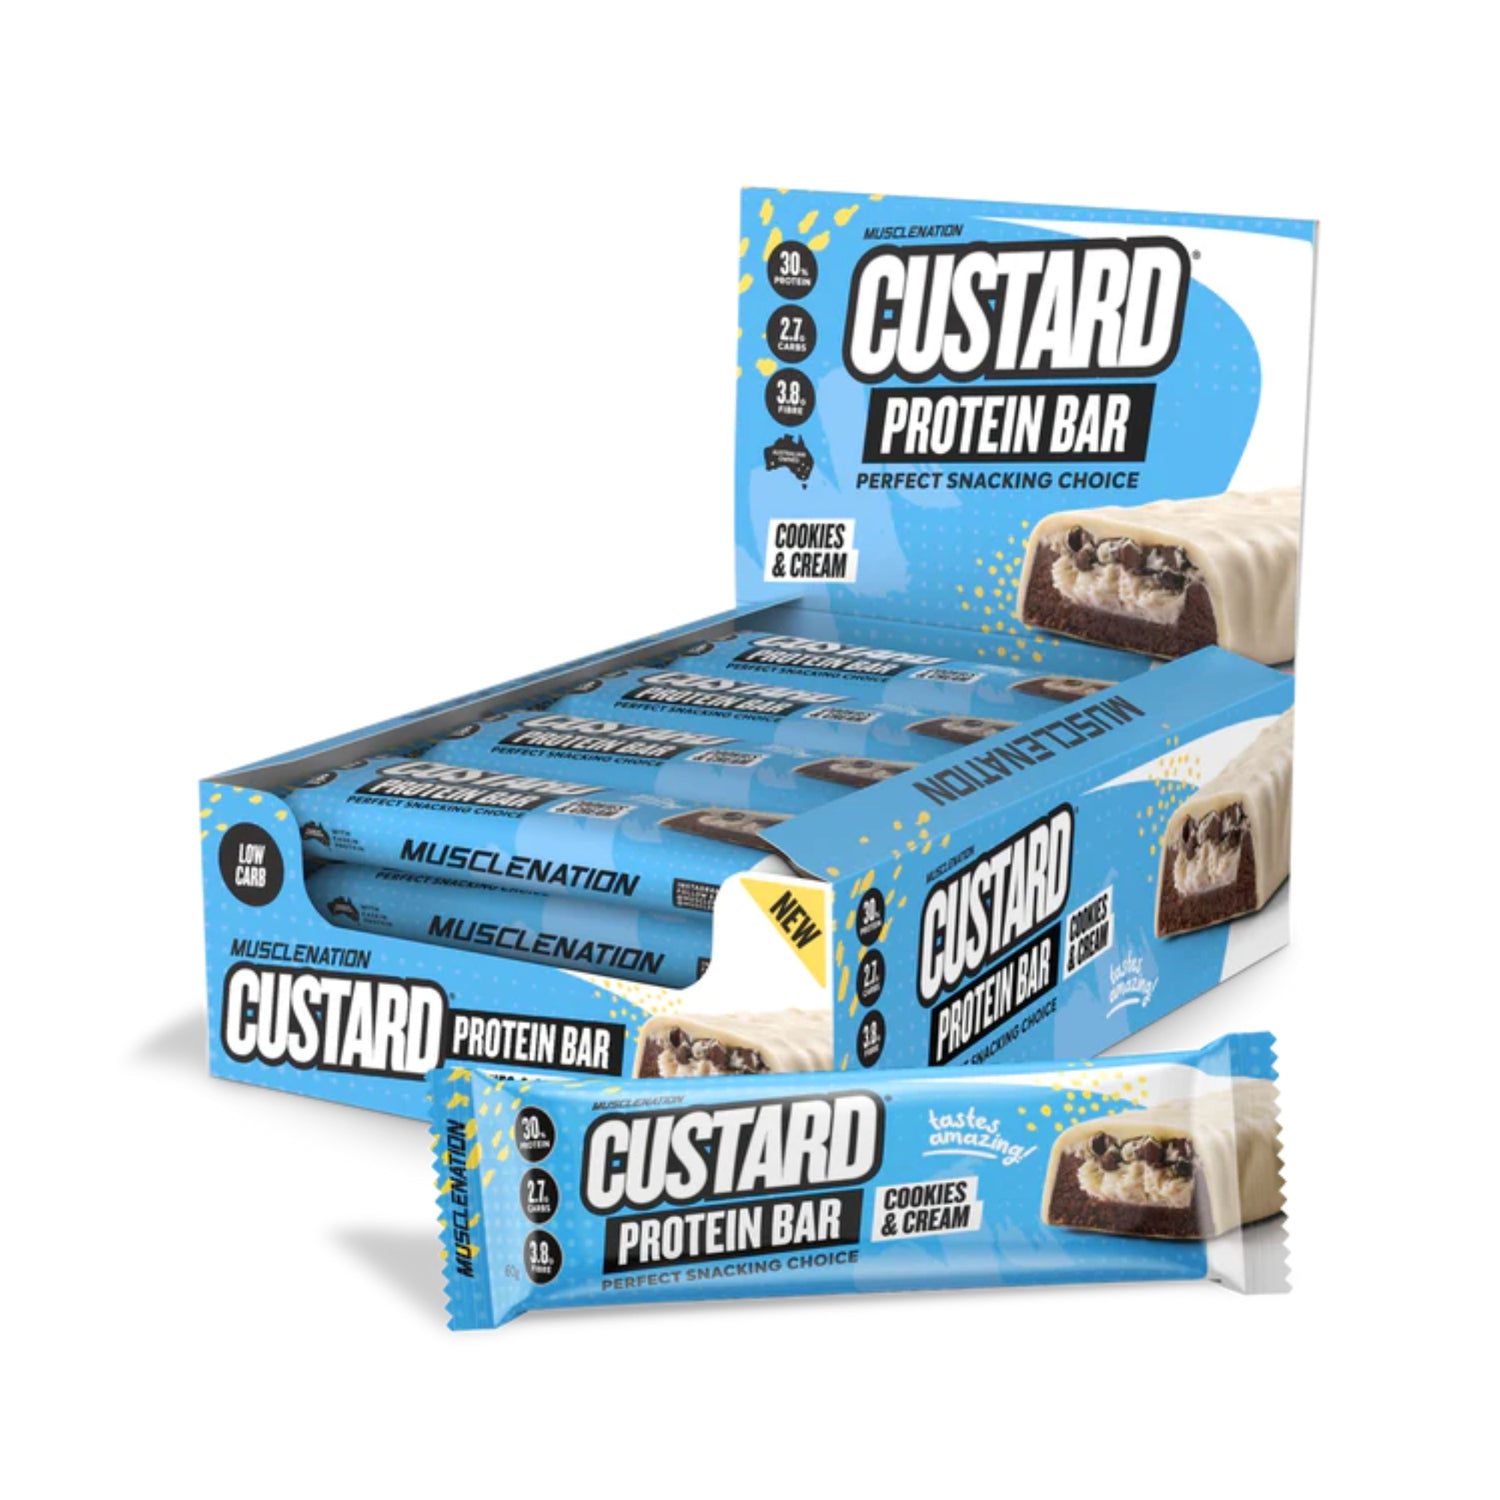 Muscle Nation Custard Protein Bar - Box of 12 Cookies and Cream